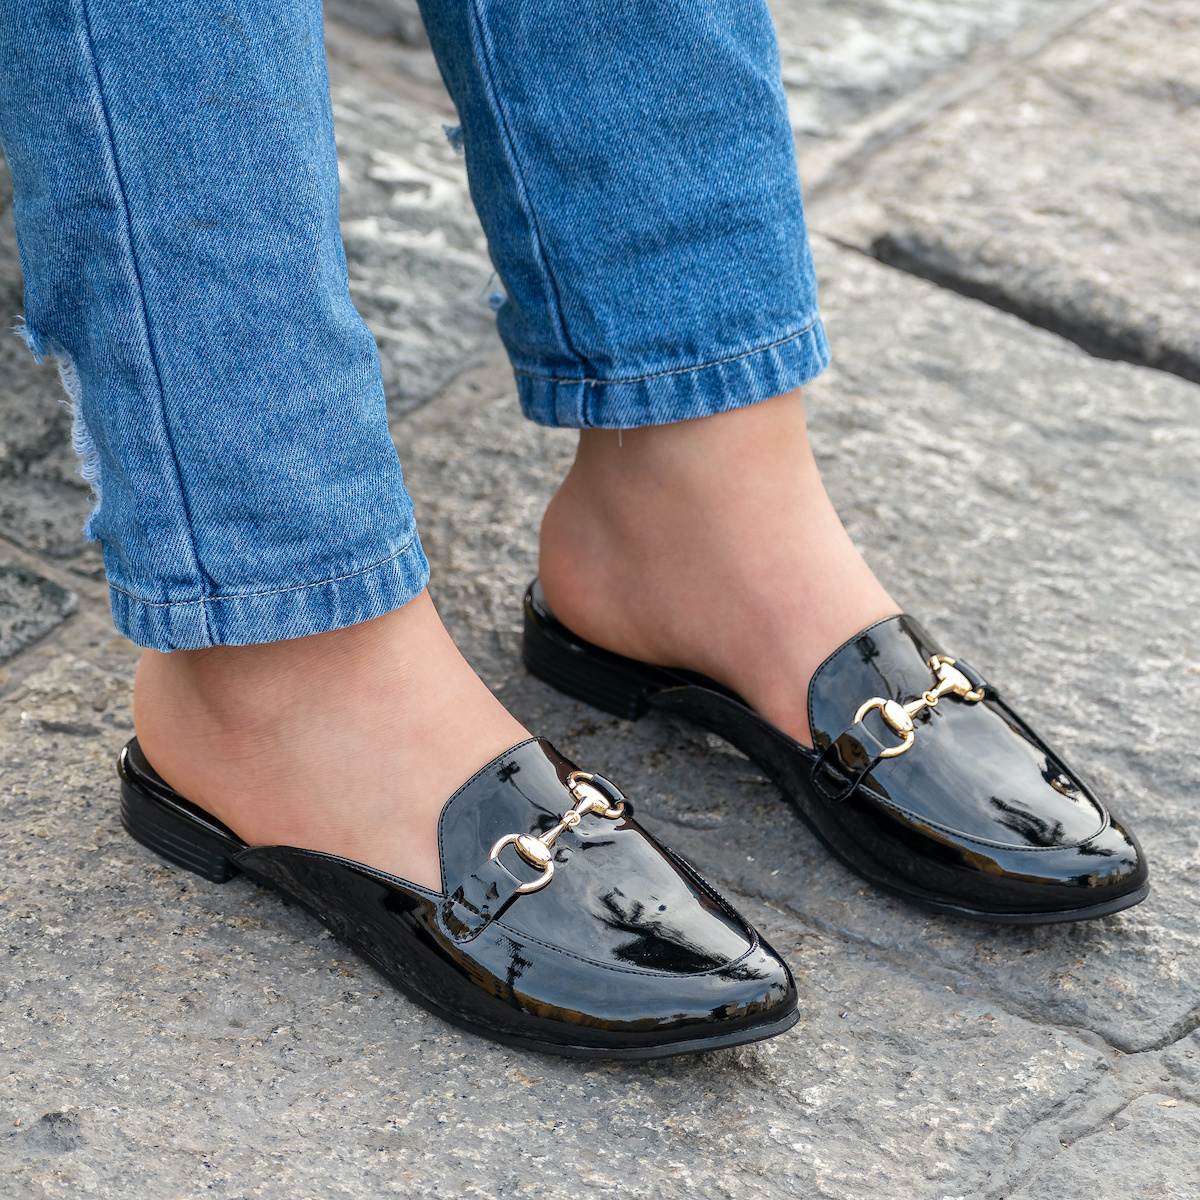 2023 trends: what to wear mule shoes with (photos)